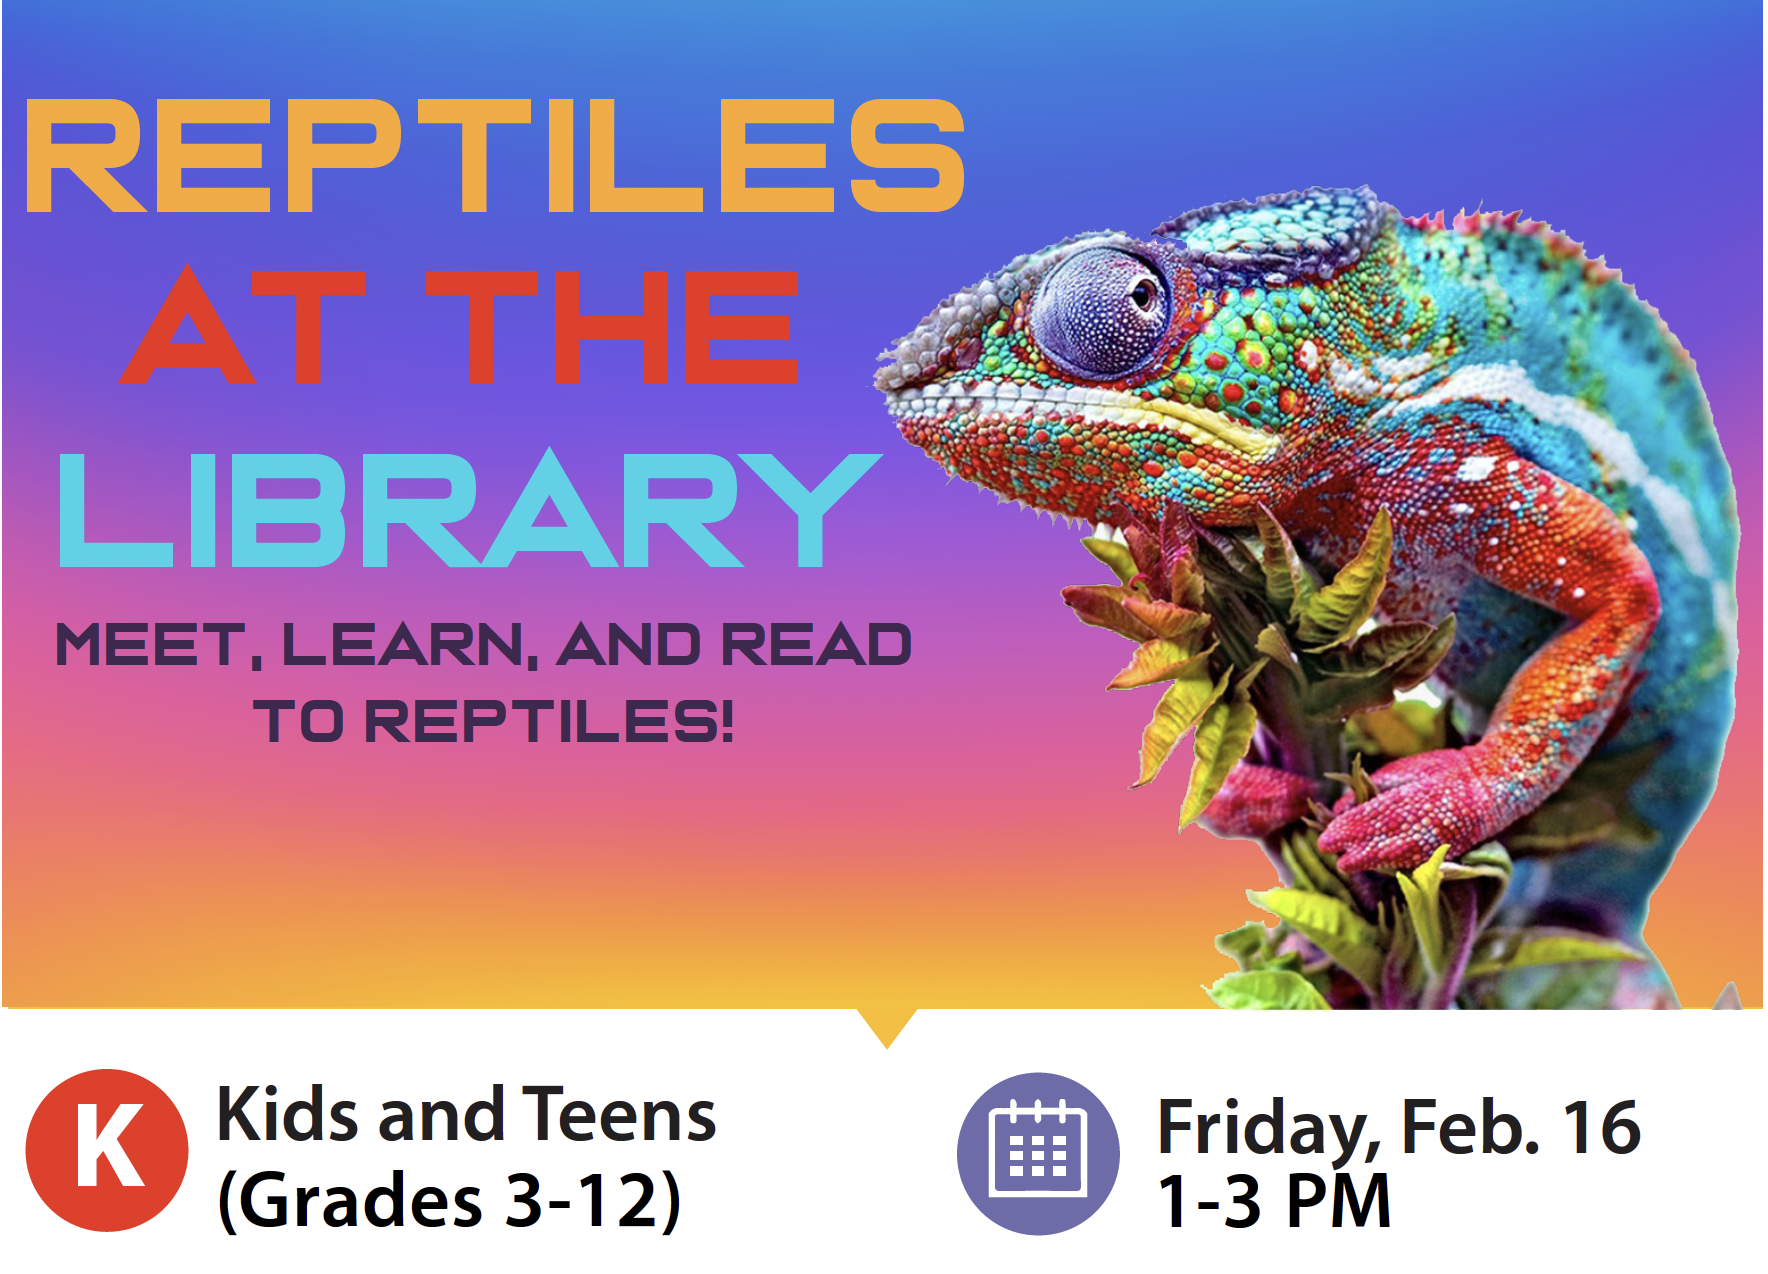 Reptiles (and amphibians) visit the public library!